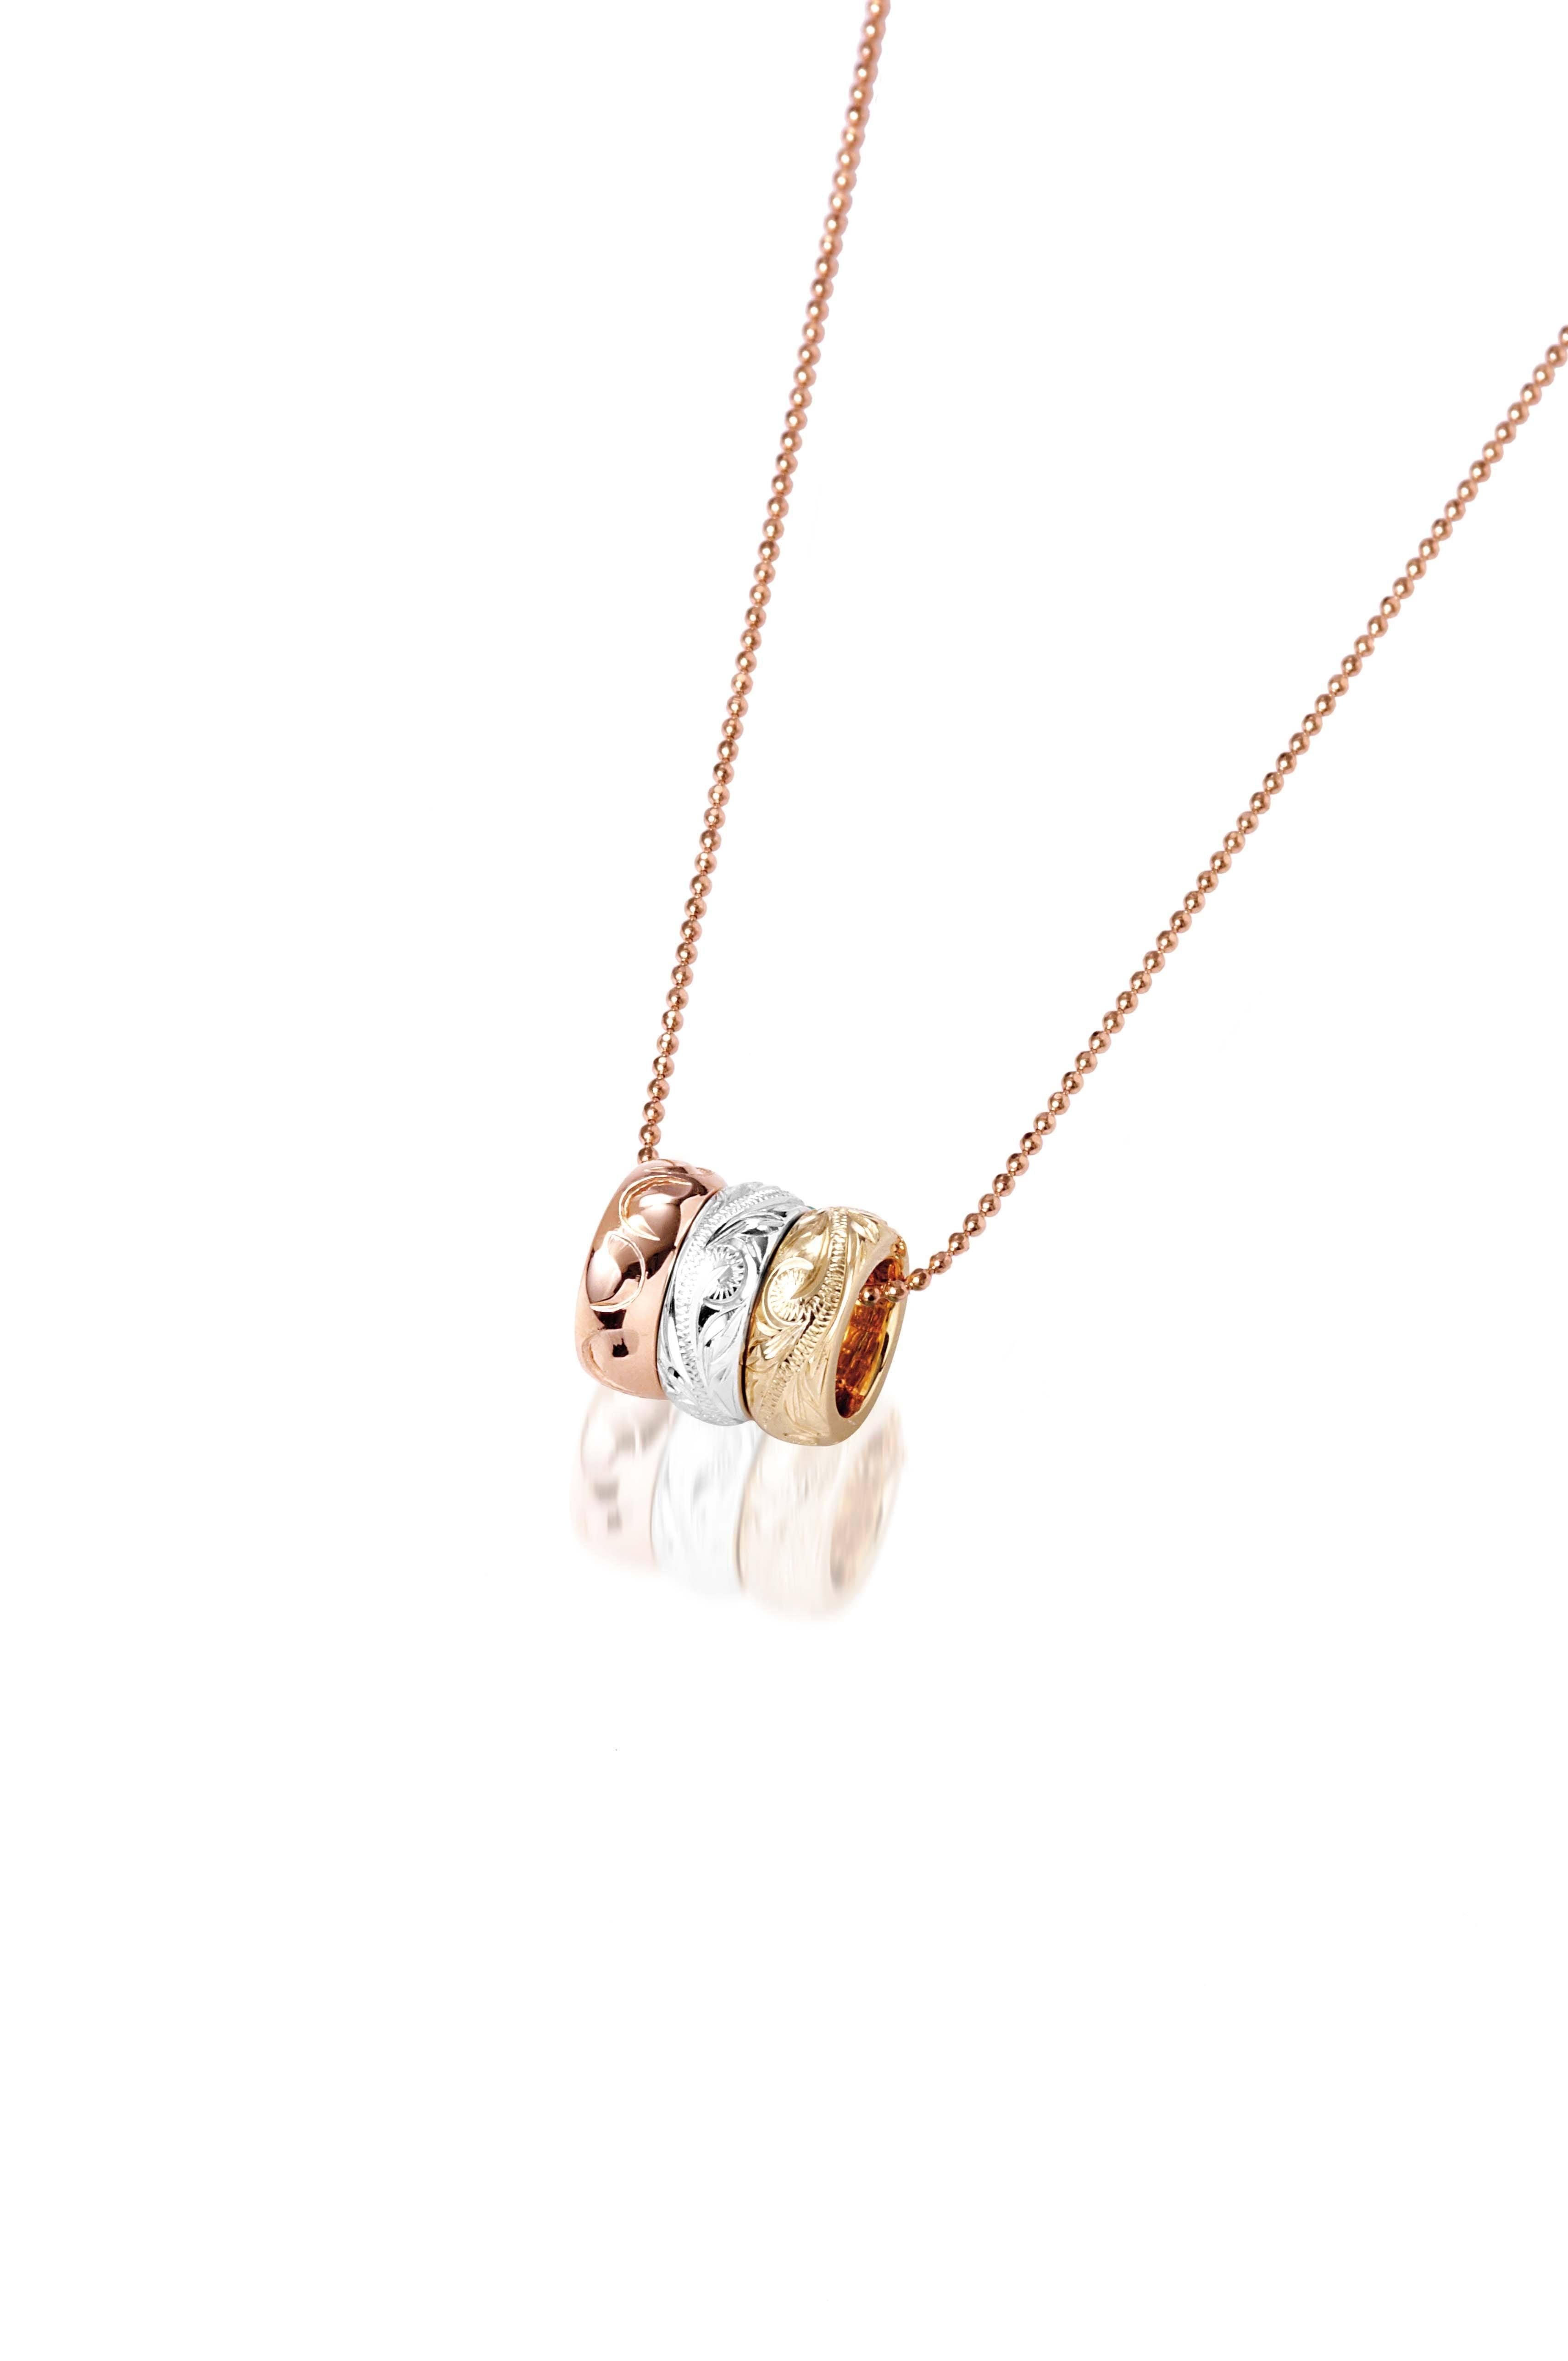 The picture shows a 14K rose, white, and yellow gold tricolor three ring pendant with hand engravings.